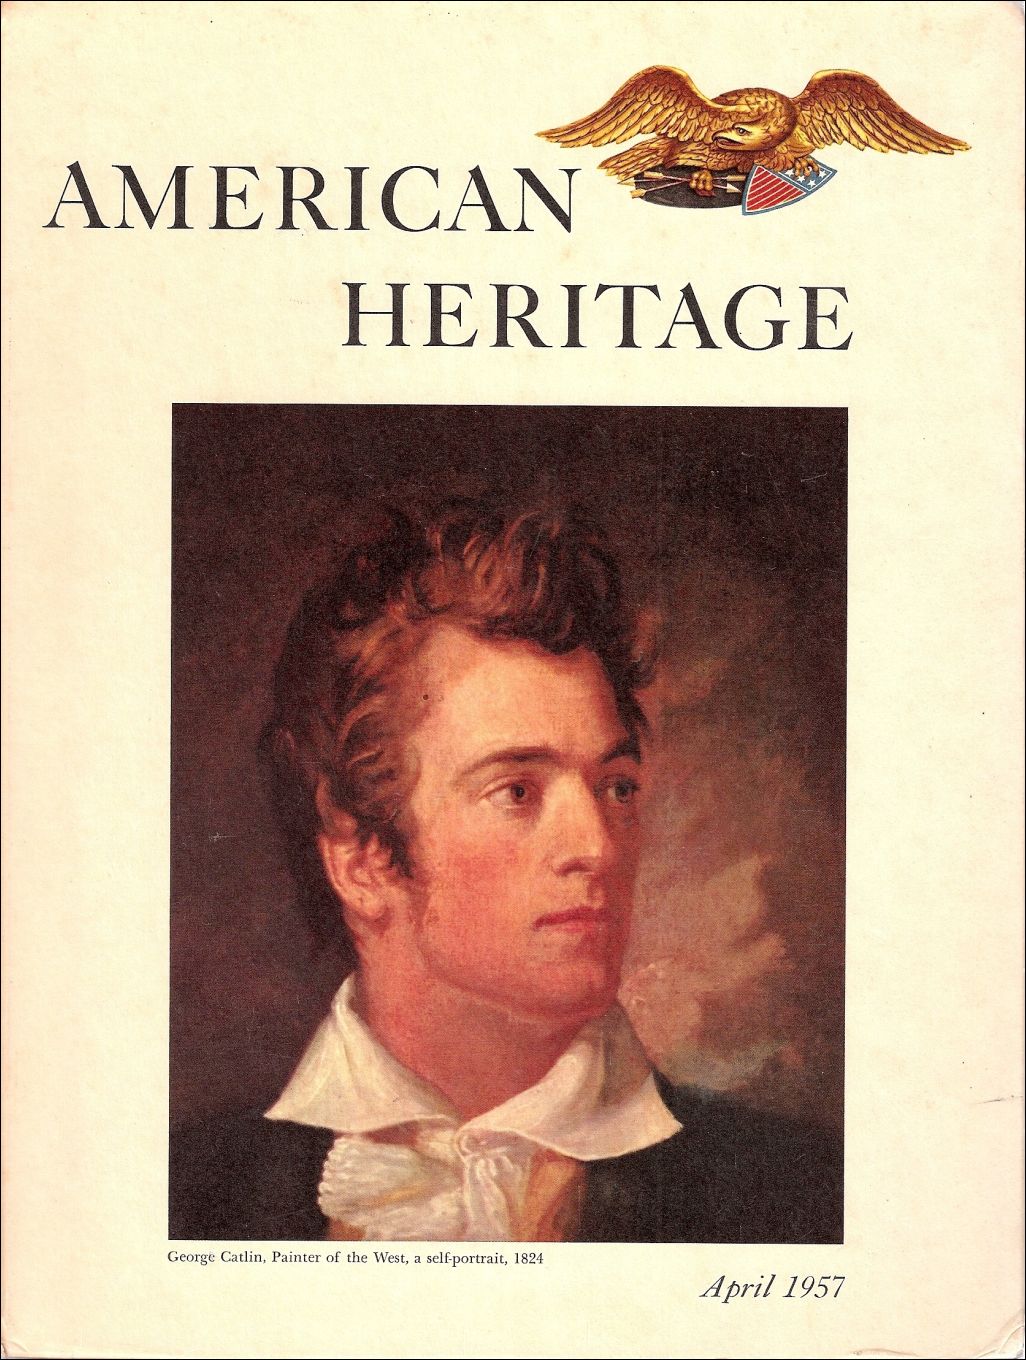 Early issues of American Heritage were hard cover and widely collected.